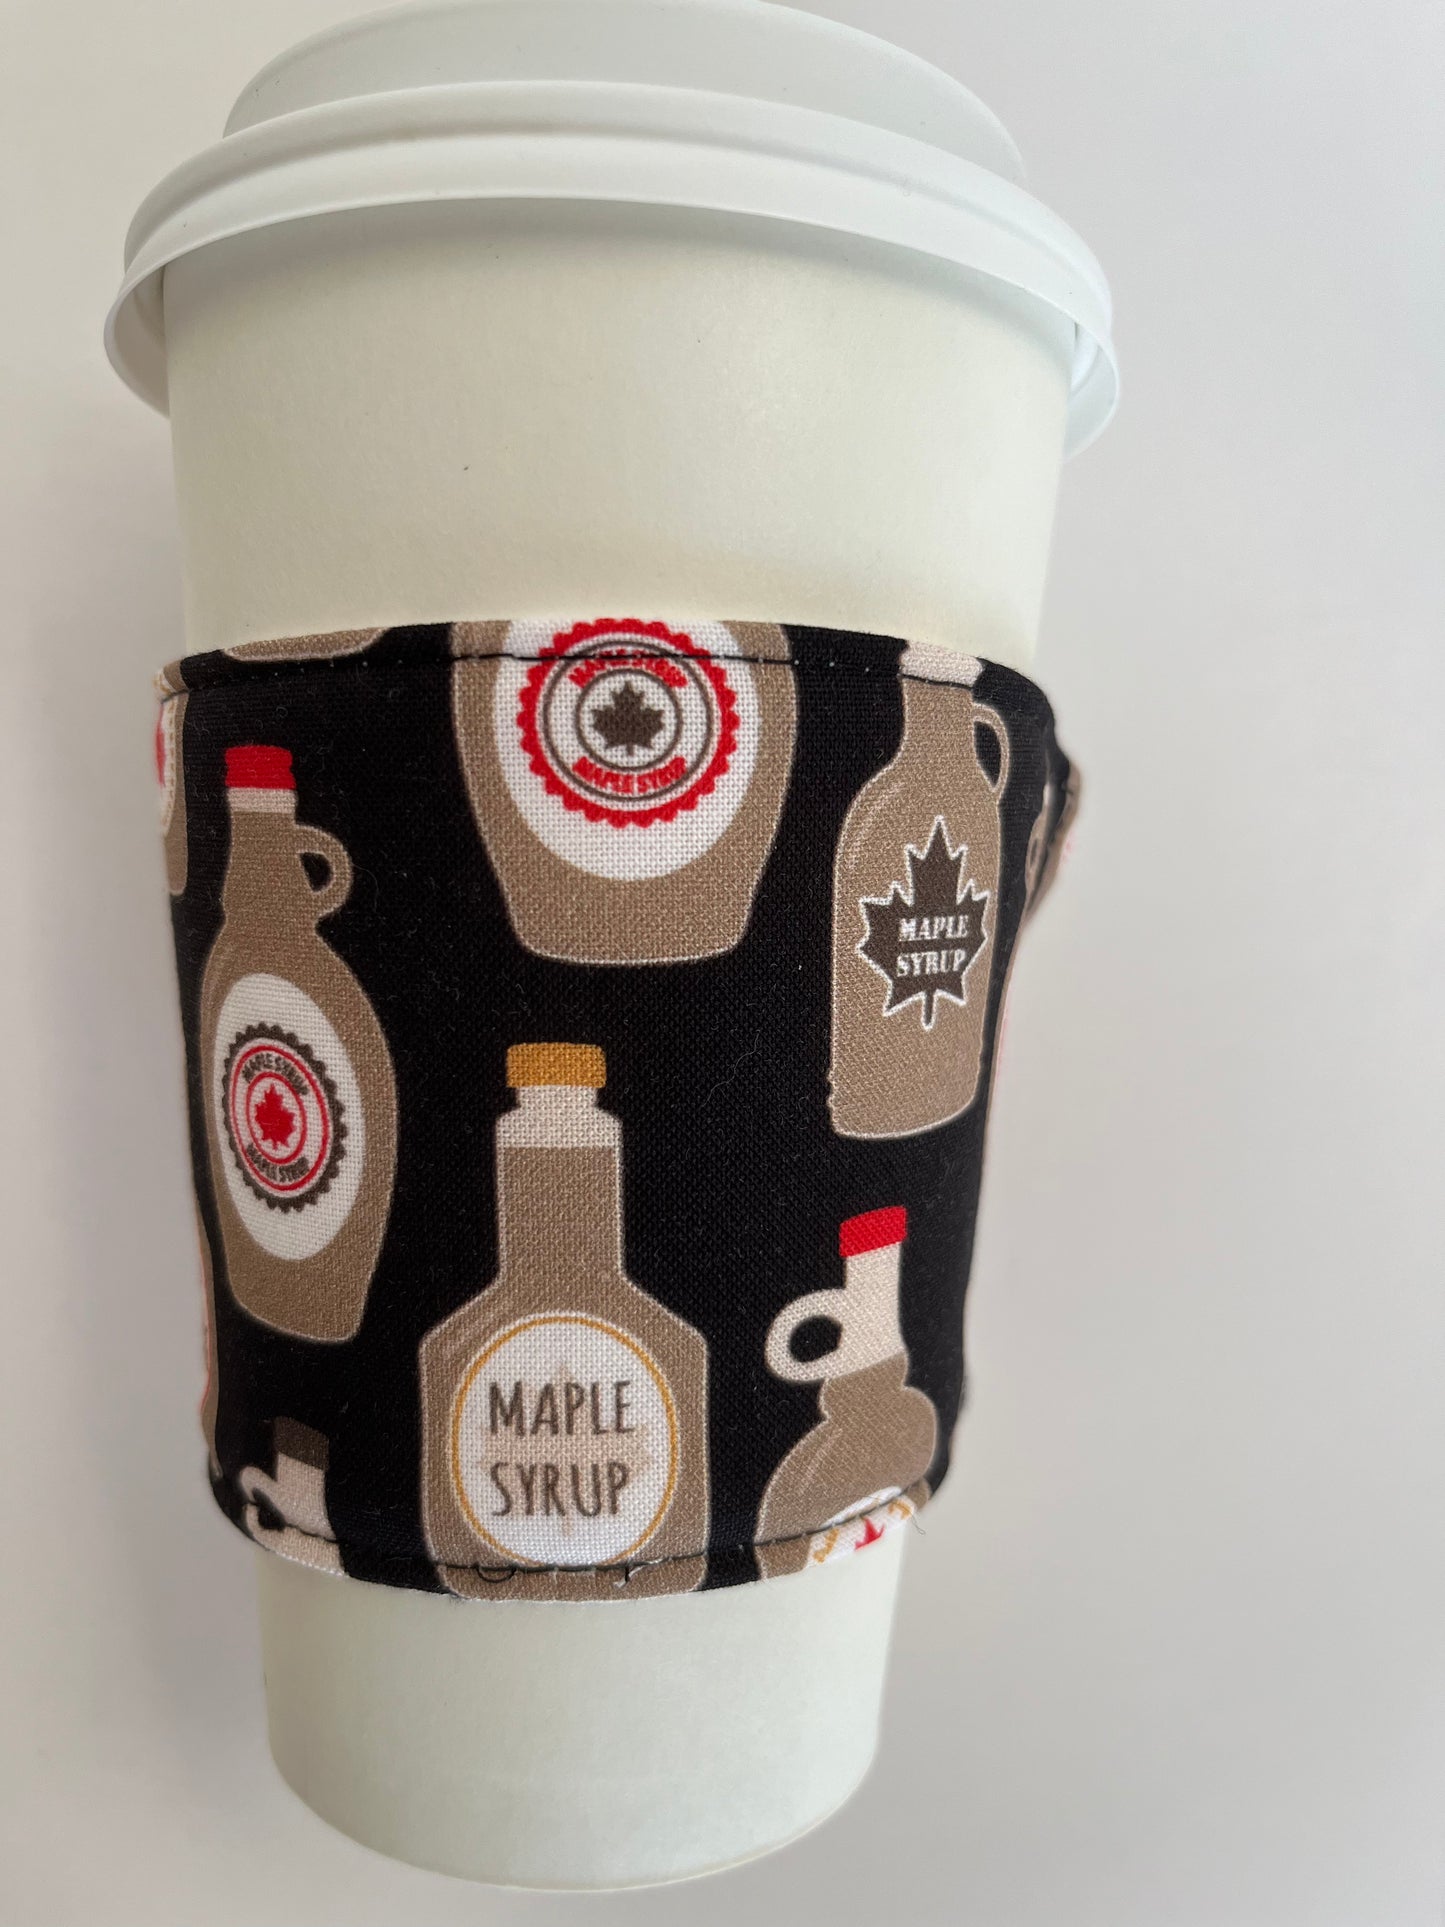 Maple Syrup Canadian Themed Coffee Cup Cozy, fabric coffee sleeve